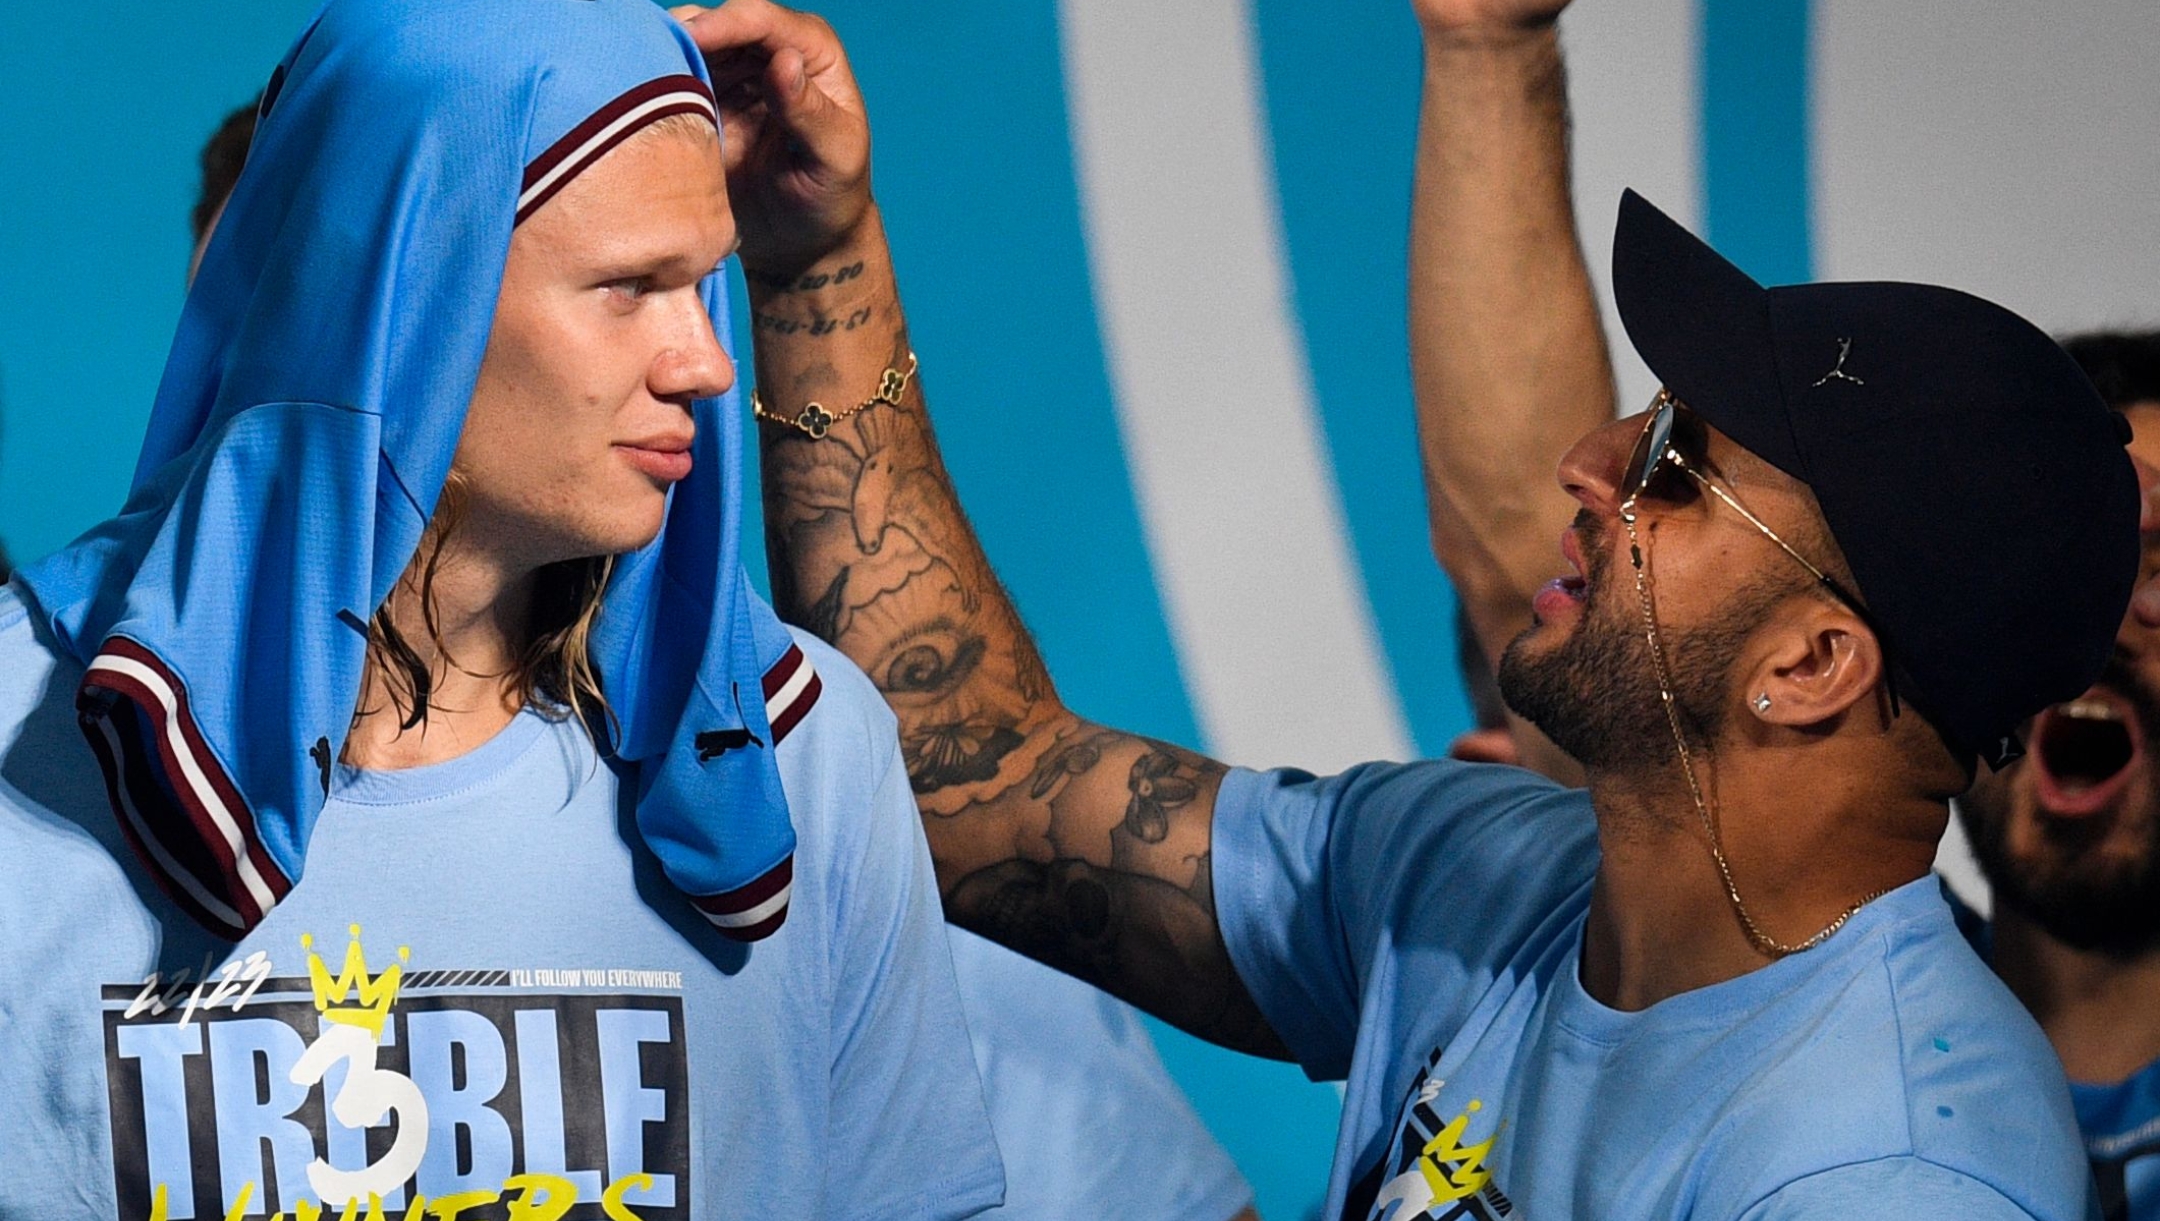 Manchester City's English defender Kyle Walker (R) plays with Manchester City's Norwegian striker Erling Haaland 's hairs as they celebrate on stage following an open-top bus victory parade for their European Cup, FA Cup and Premier League victories, in Manchester, northern England on June 12, 2023. Manchester City tasted Champions League glory at last on Saturday as a second-half Rodri strike gave the favourites a 1-0 victory over Inter Milan in a tense final, allowing Pep Guardiola's side to complete a remarkable treble. Having already claimed a fifth Premier League title in six seasons, and added the FA Cup, City are the first English club to win such a treble since Manchester United in 1999. (Photo by Oli SCARFF / AFP)